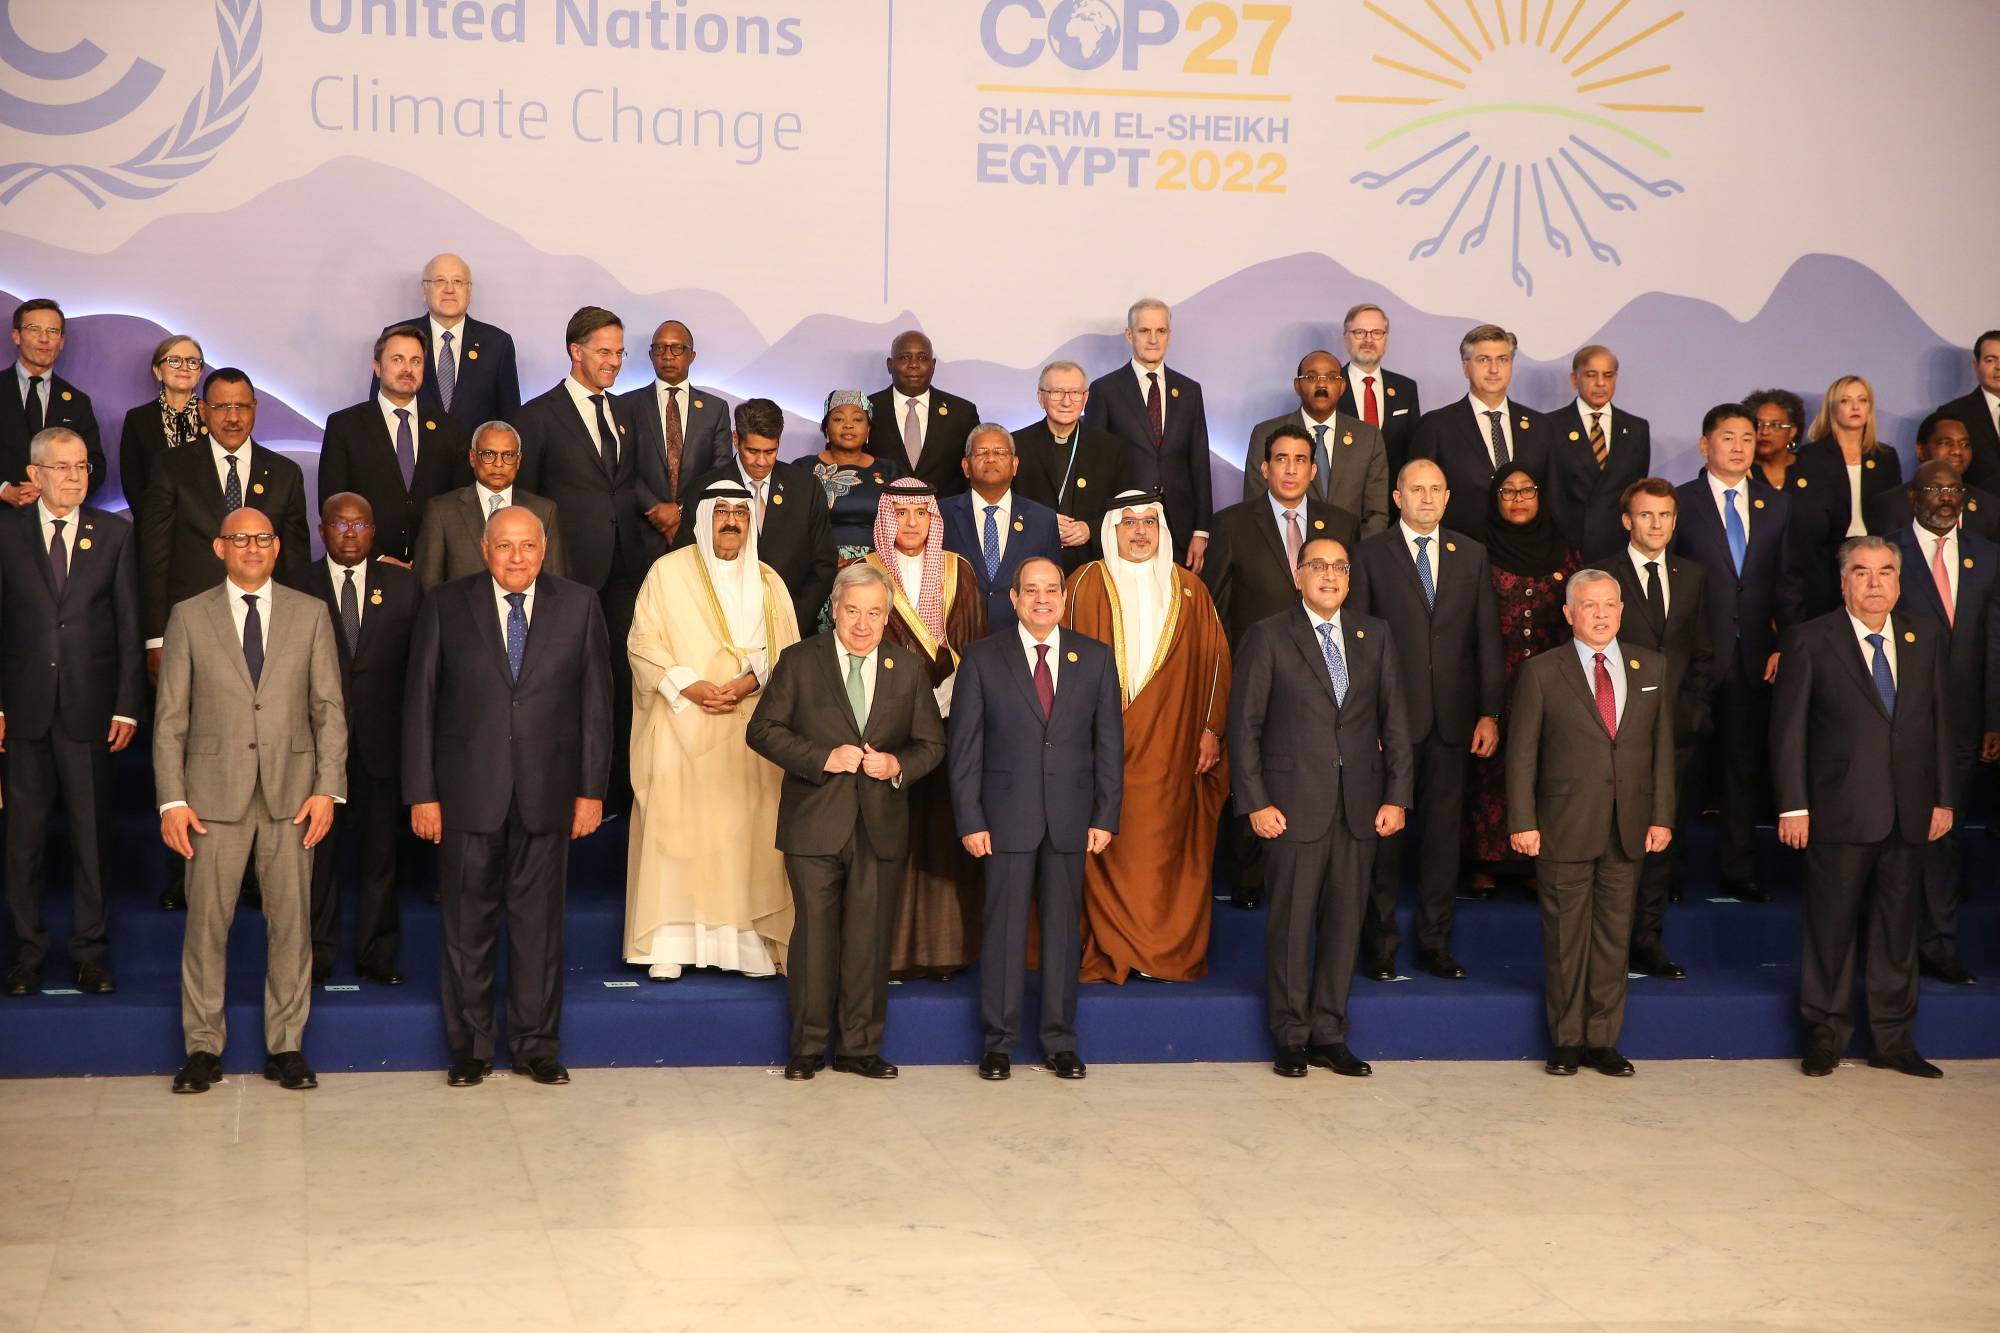 World leaders gather for a photo at the COP27 climate conference in Sharm el-Sheikh on Nov. 7. | BLOOMBERG